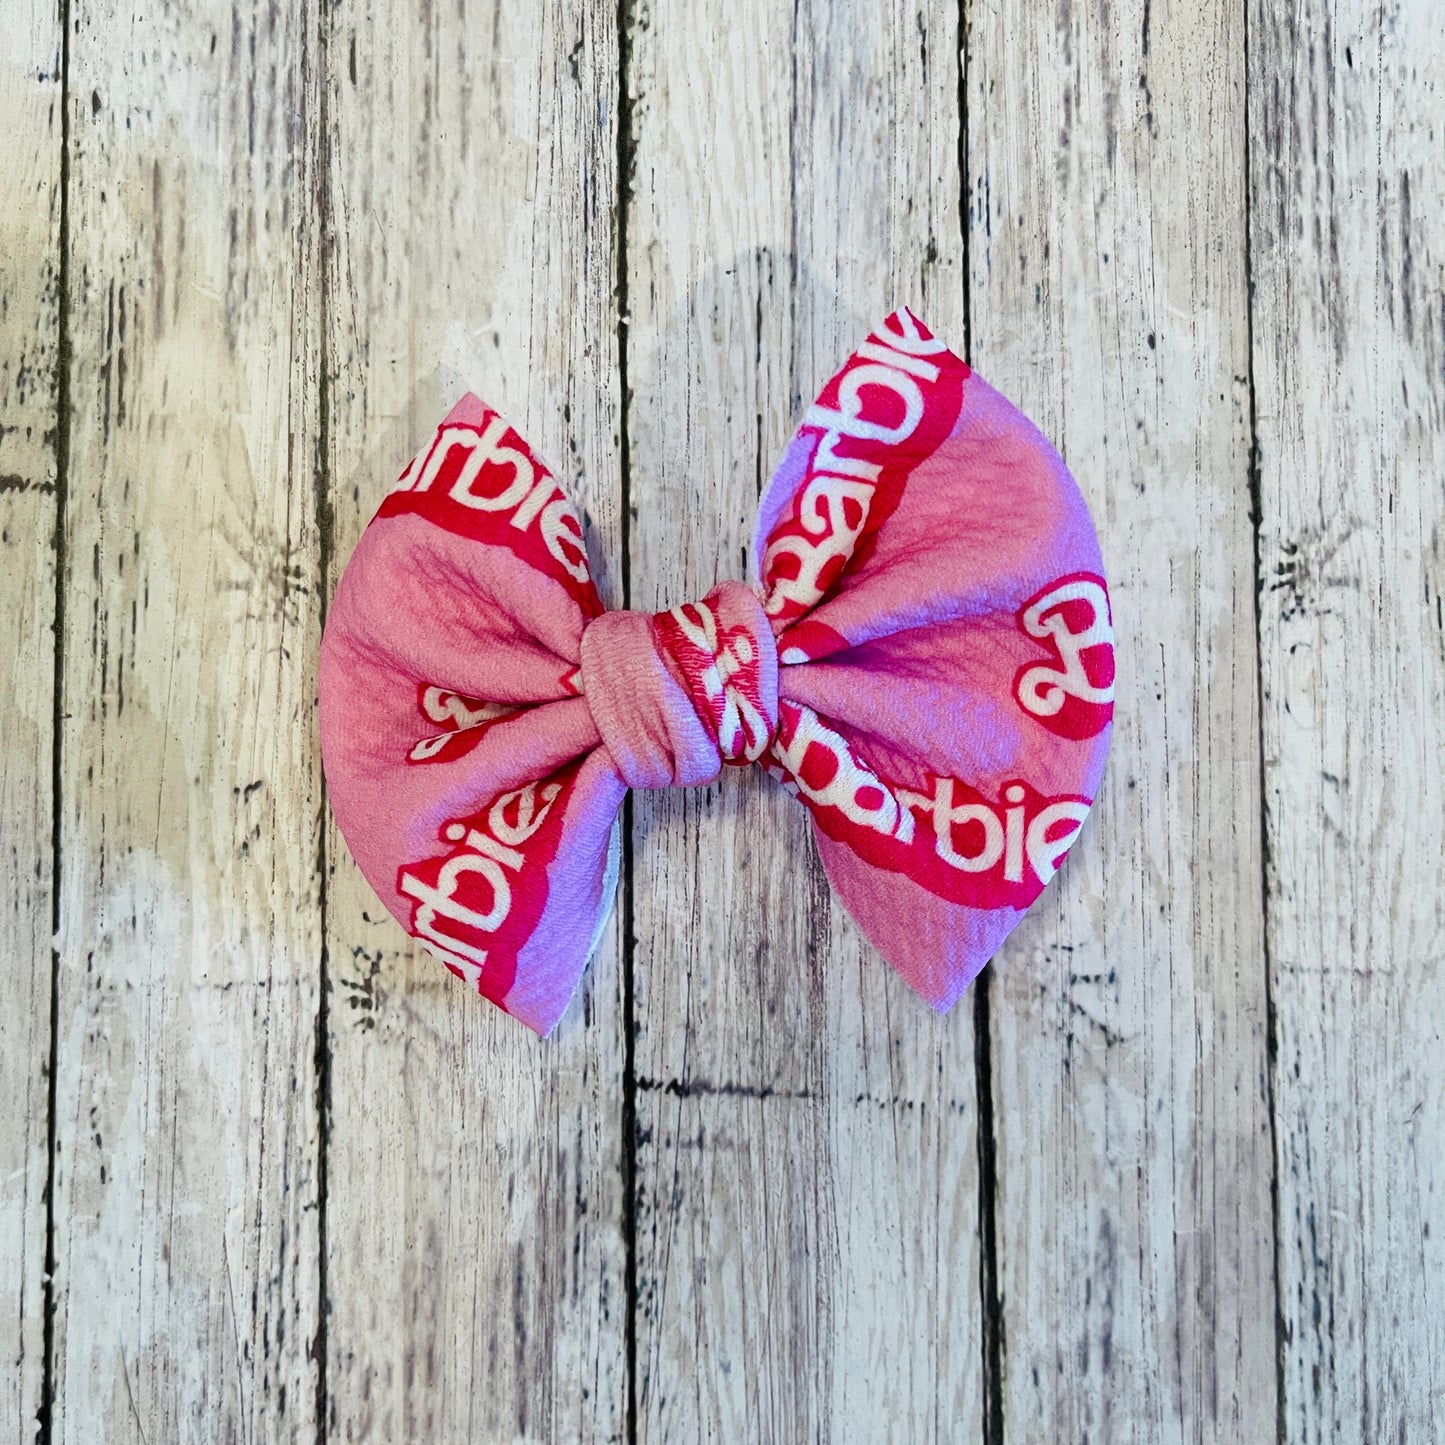 Baby Girl Bows - Barbie